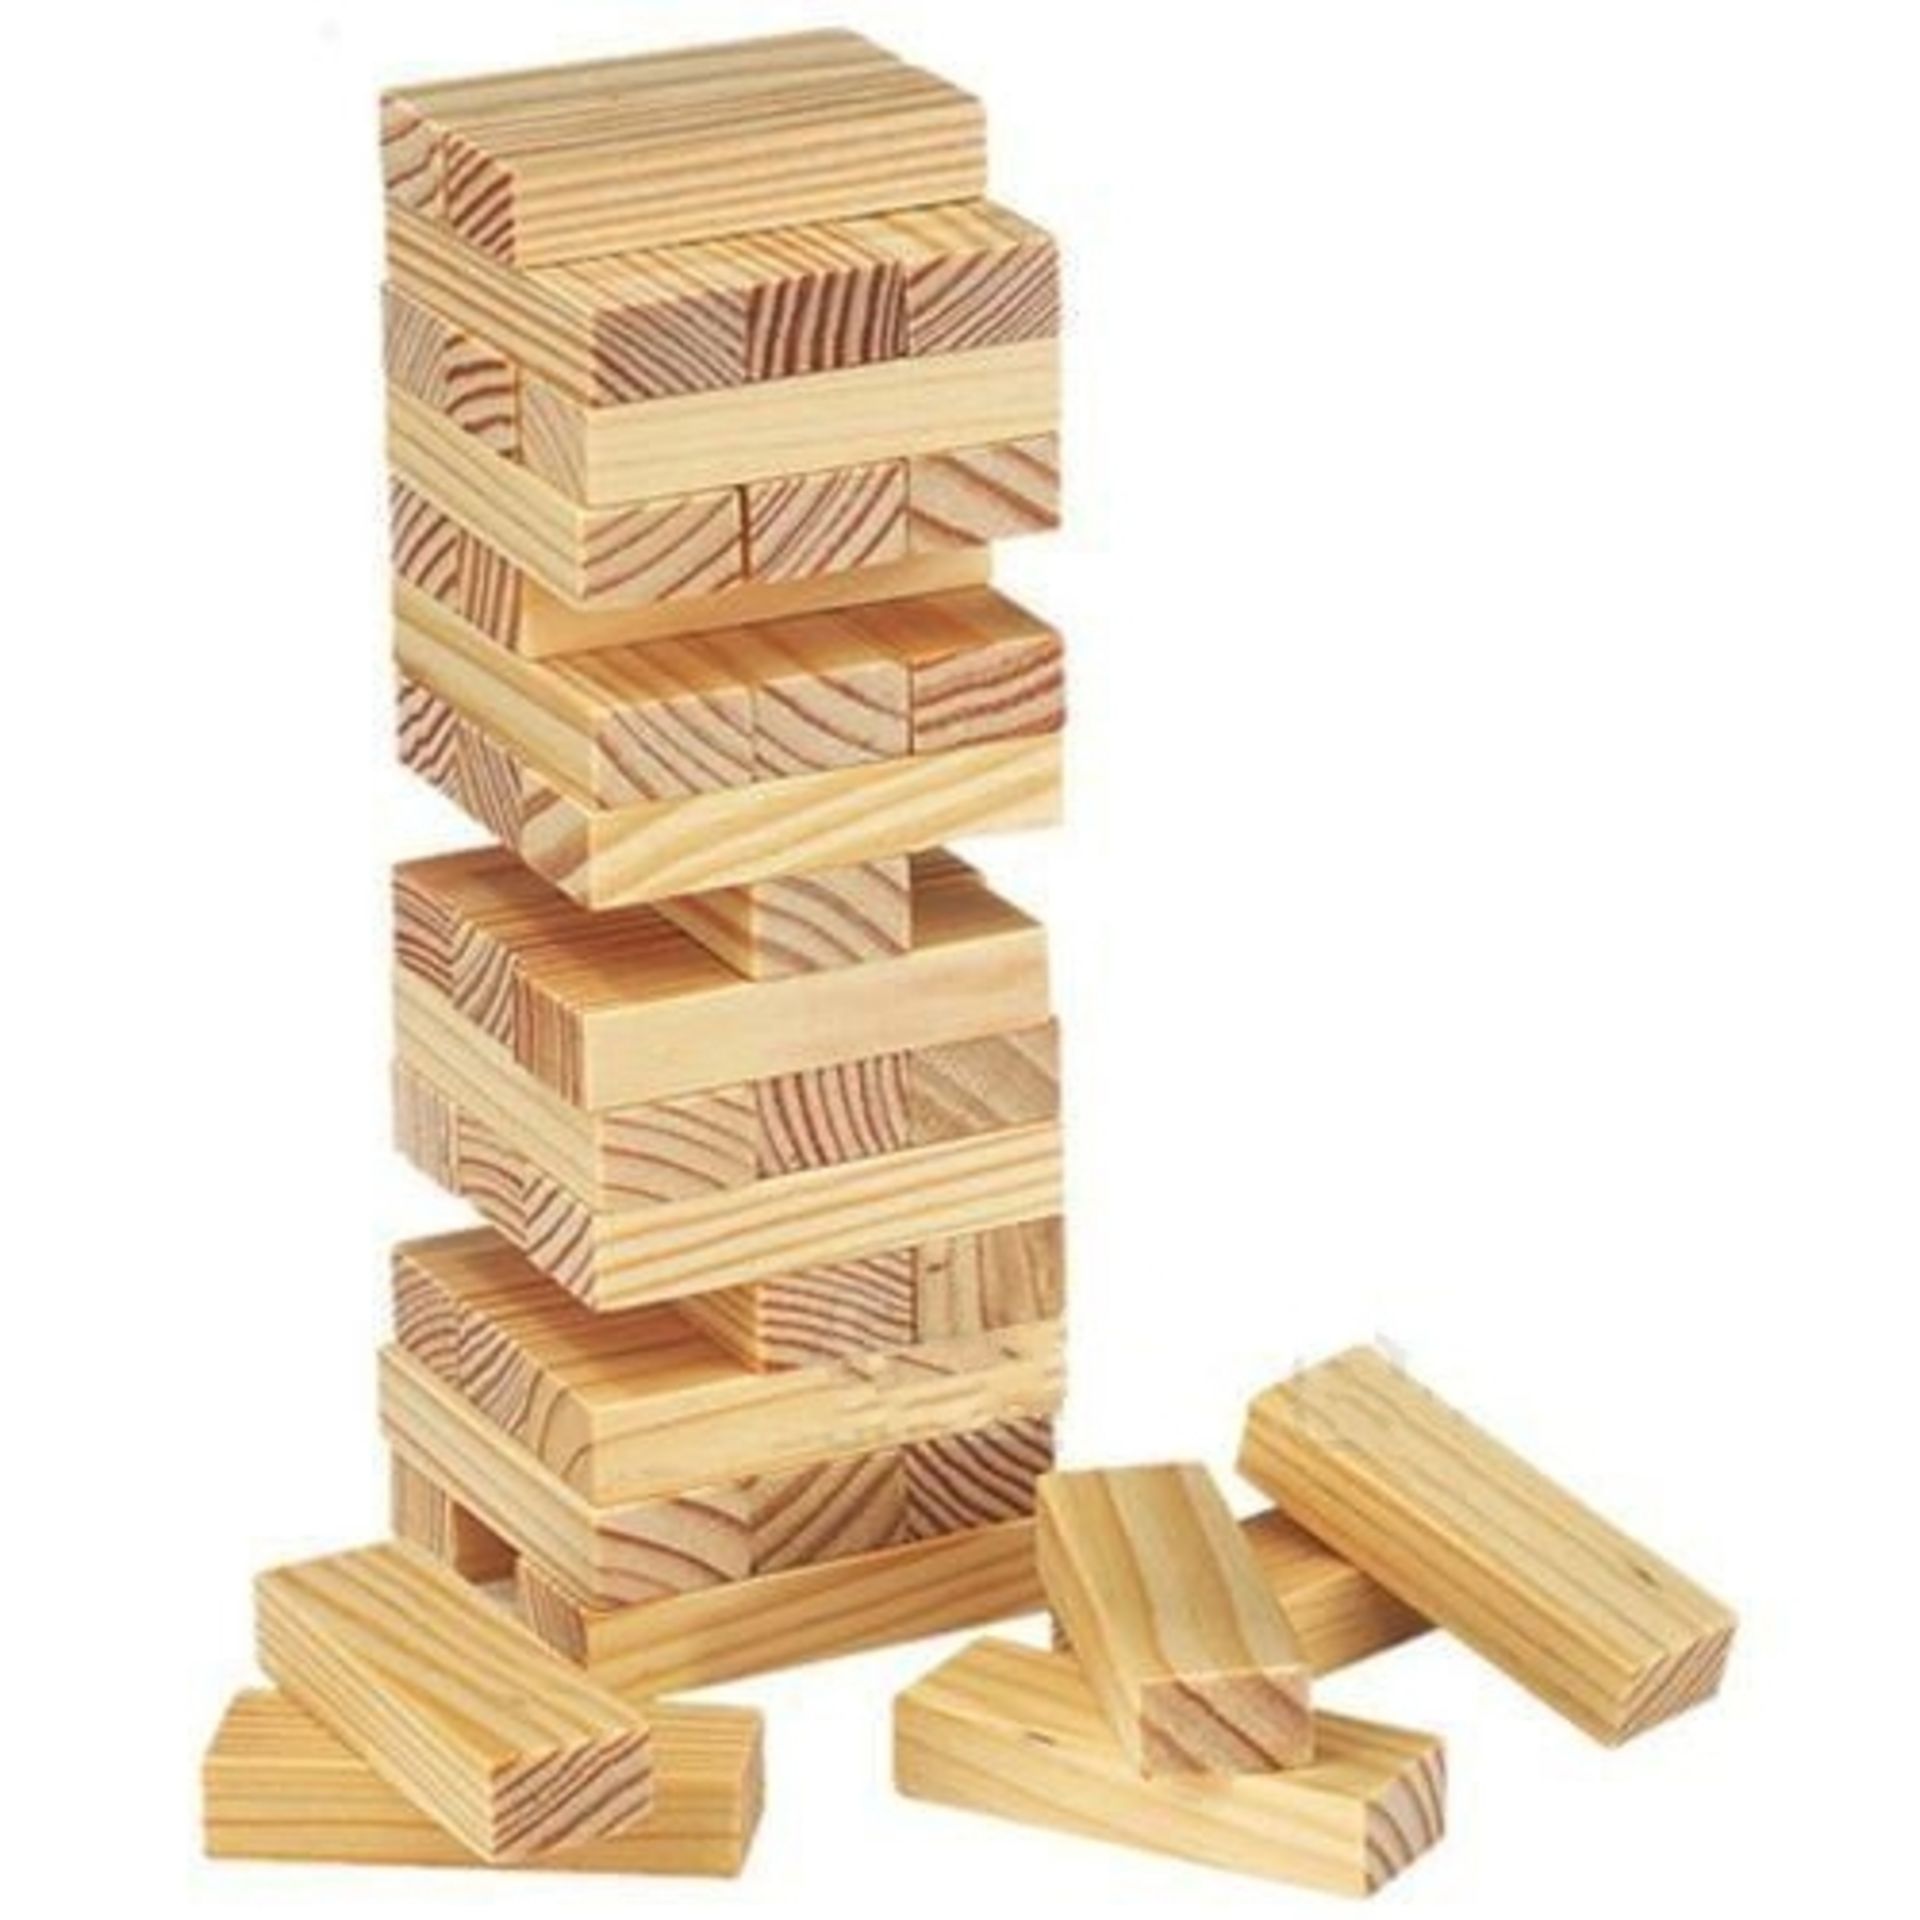 V *TRADE QTY* Brand New Quality Wooden Tower Block Game X 6 YOUR BID PRICE TO BE MULTIPLIED BY SIX